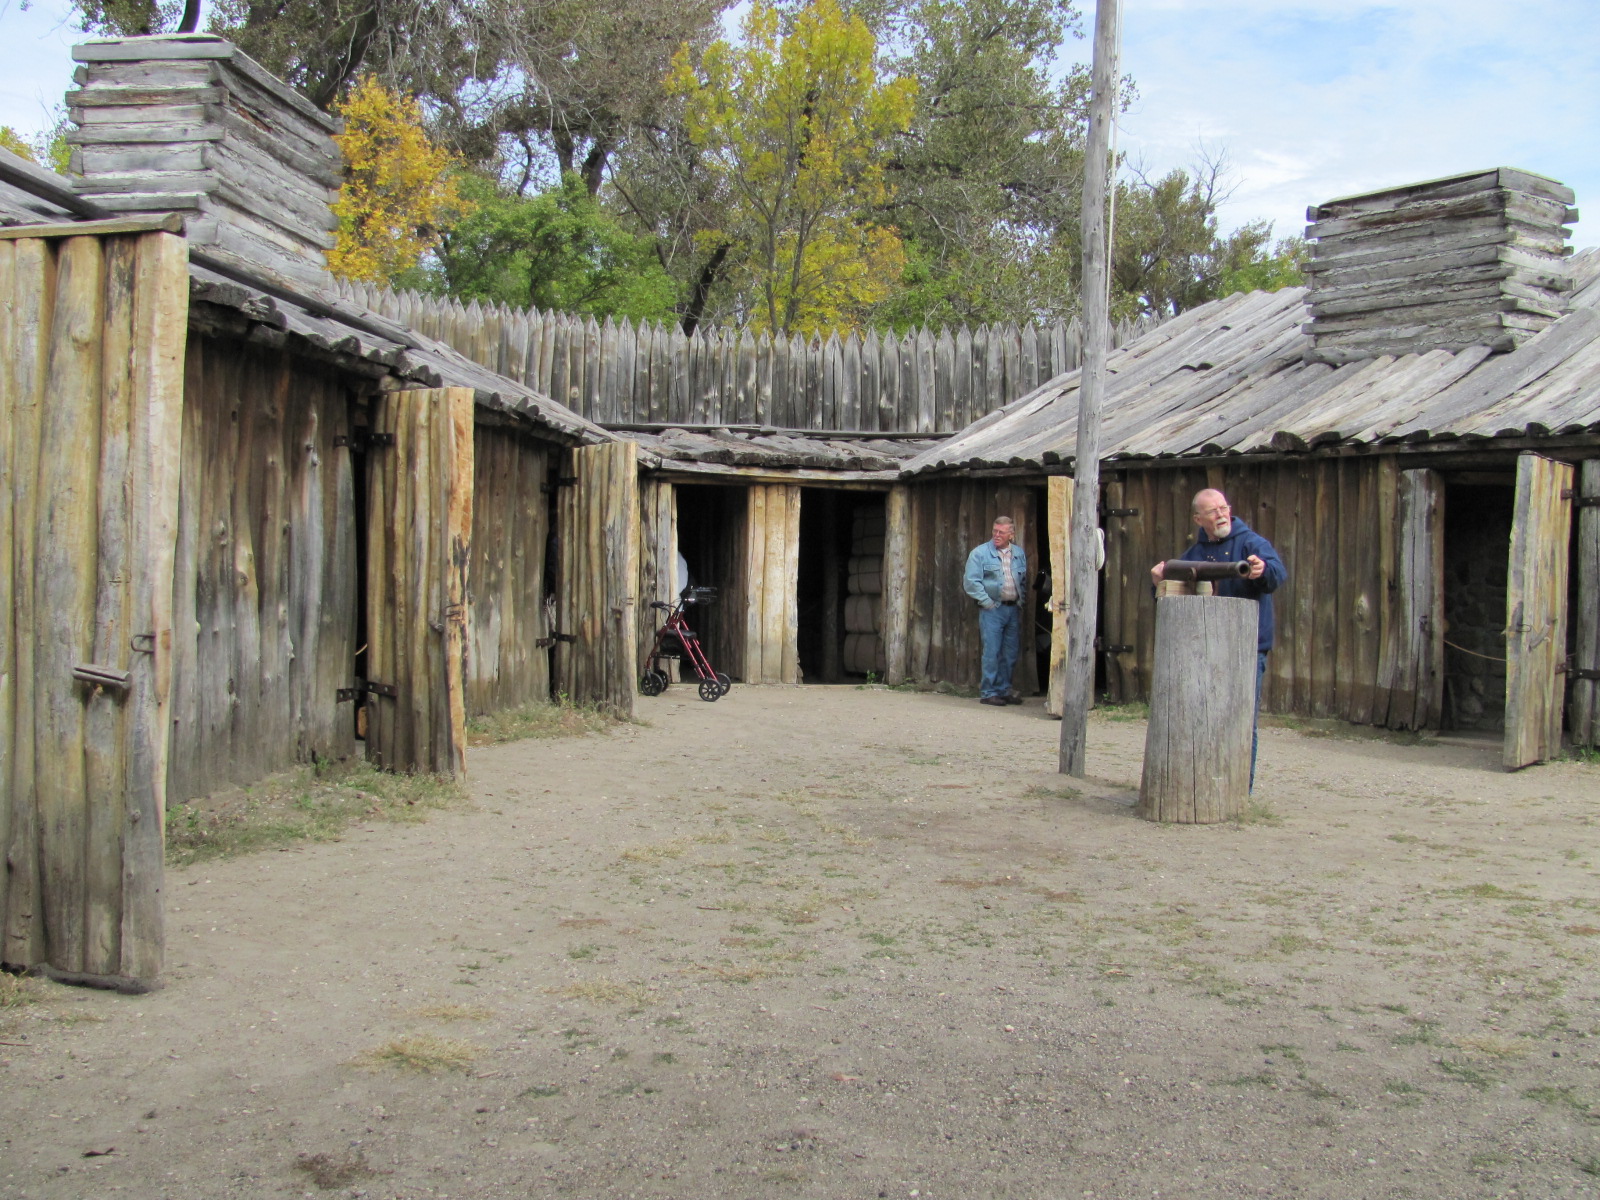 What are some facts about Fort Mandan's history?